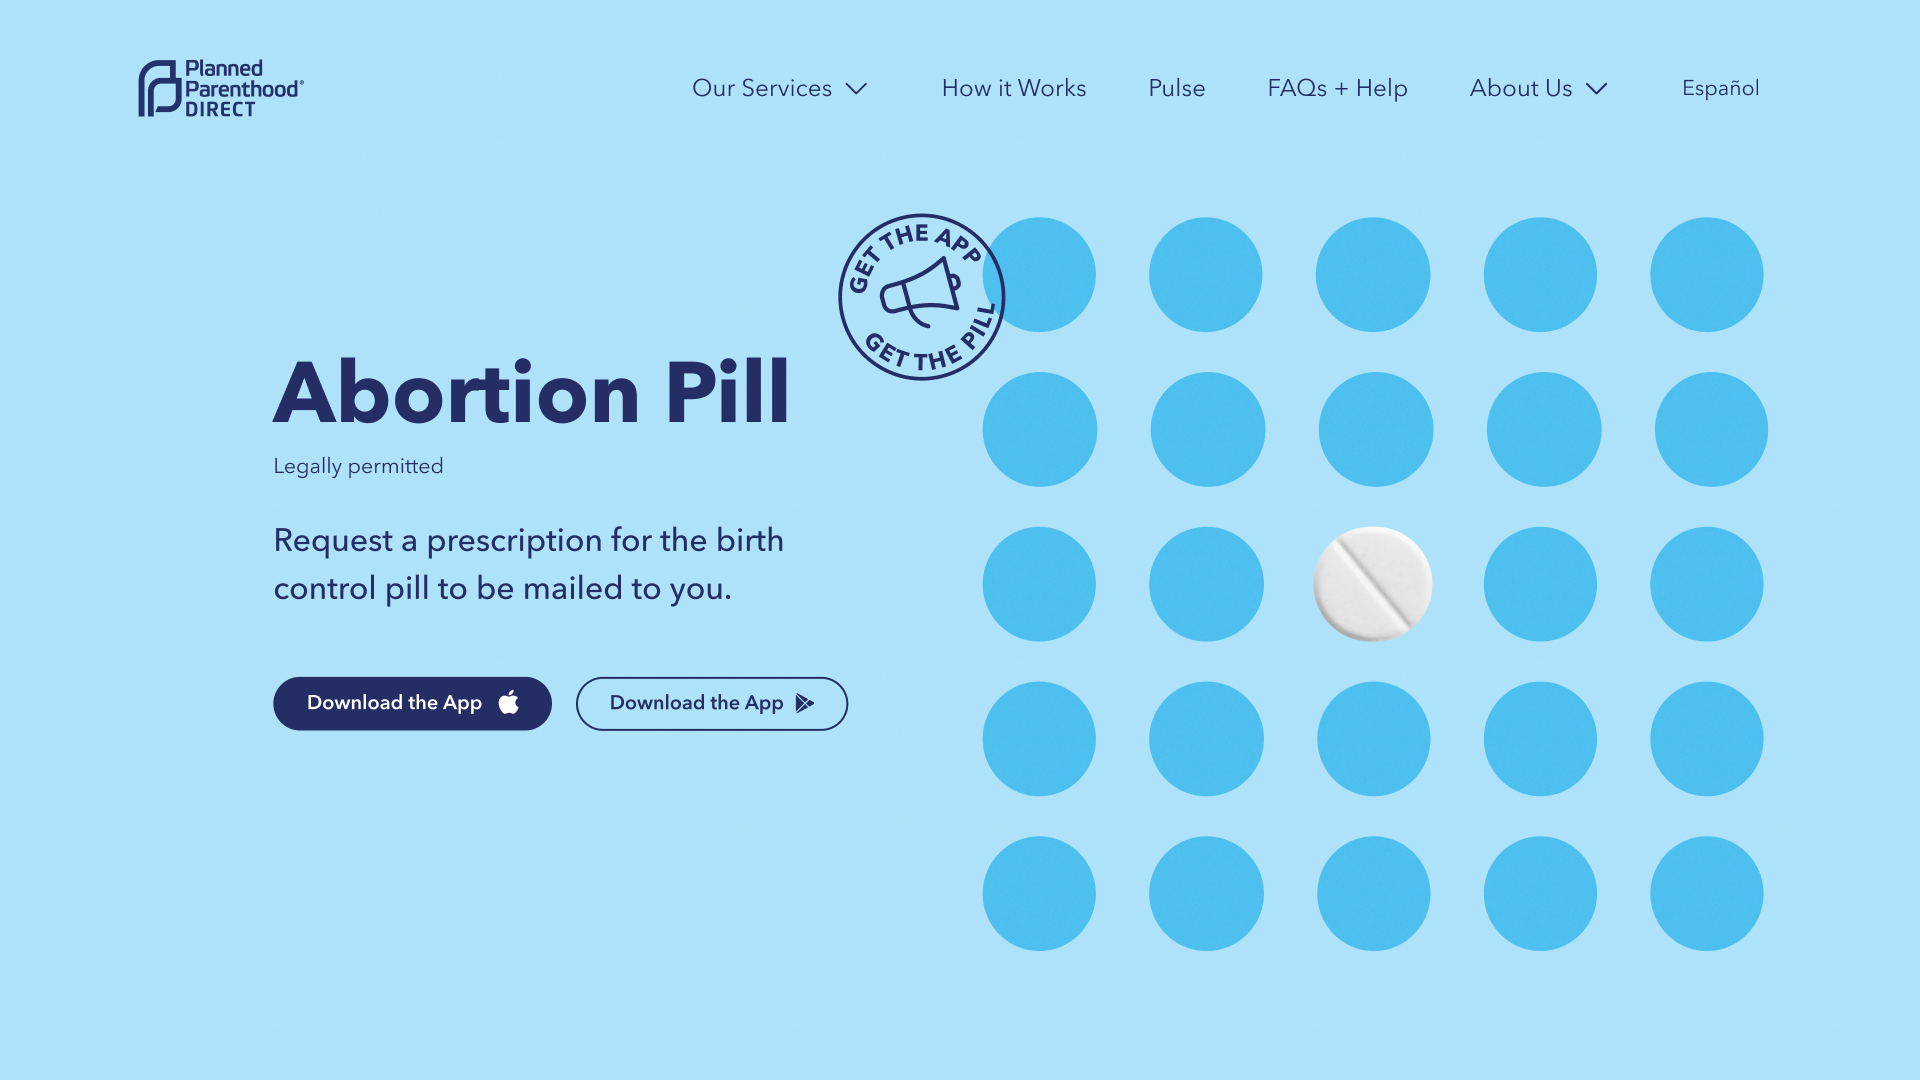 Landing page titled "Abortion pill"